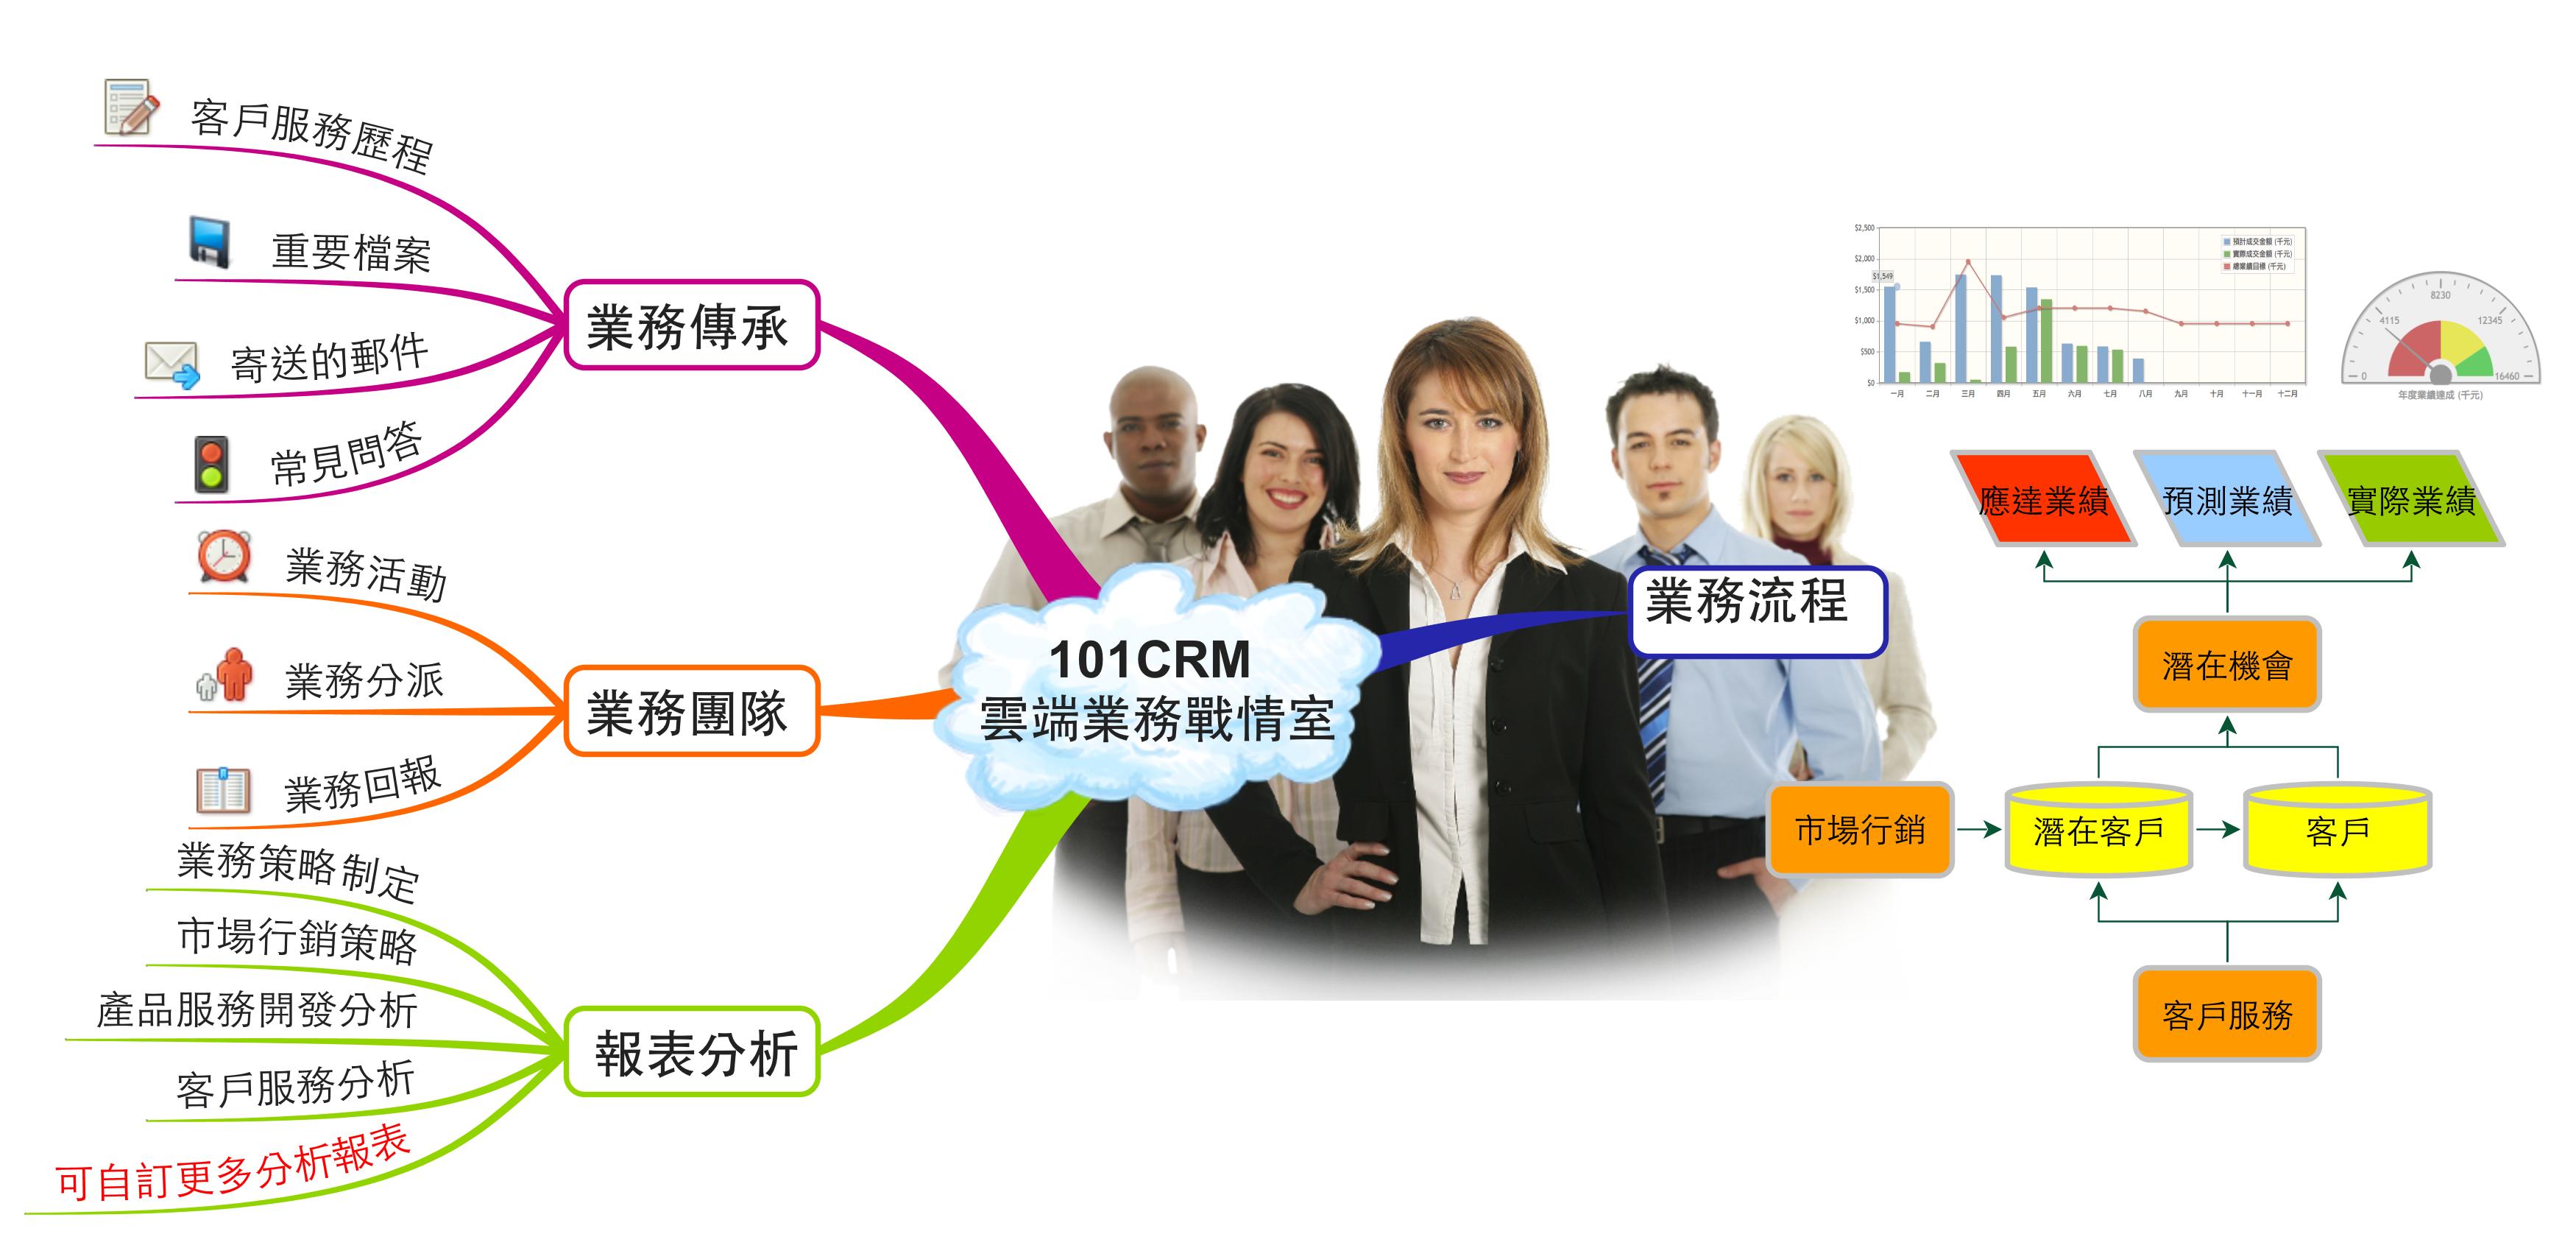 101crm_functions